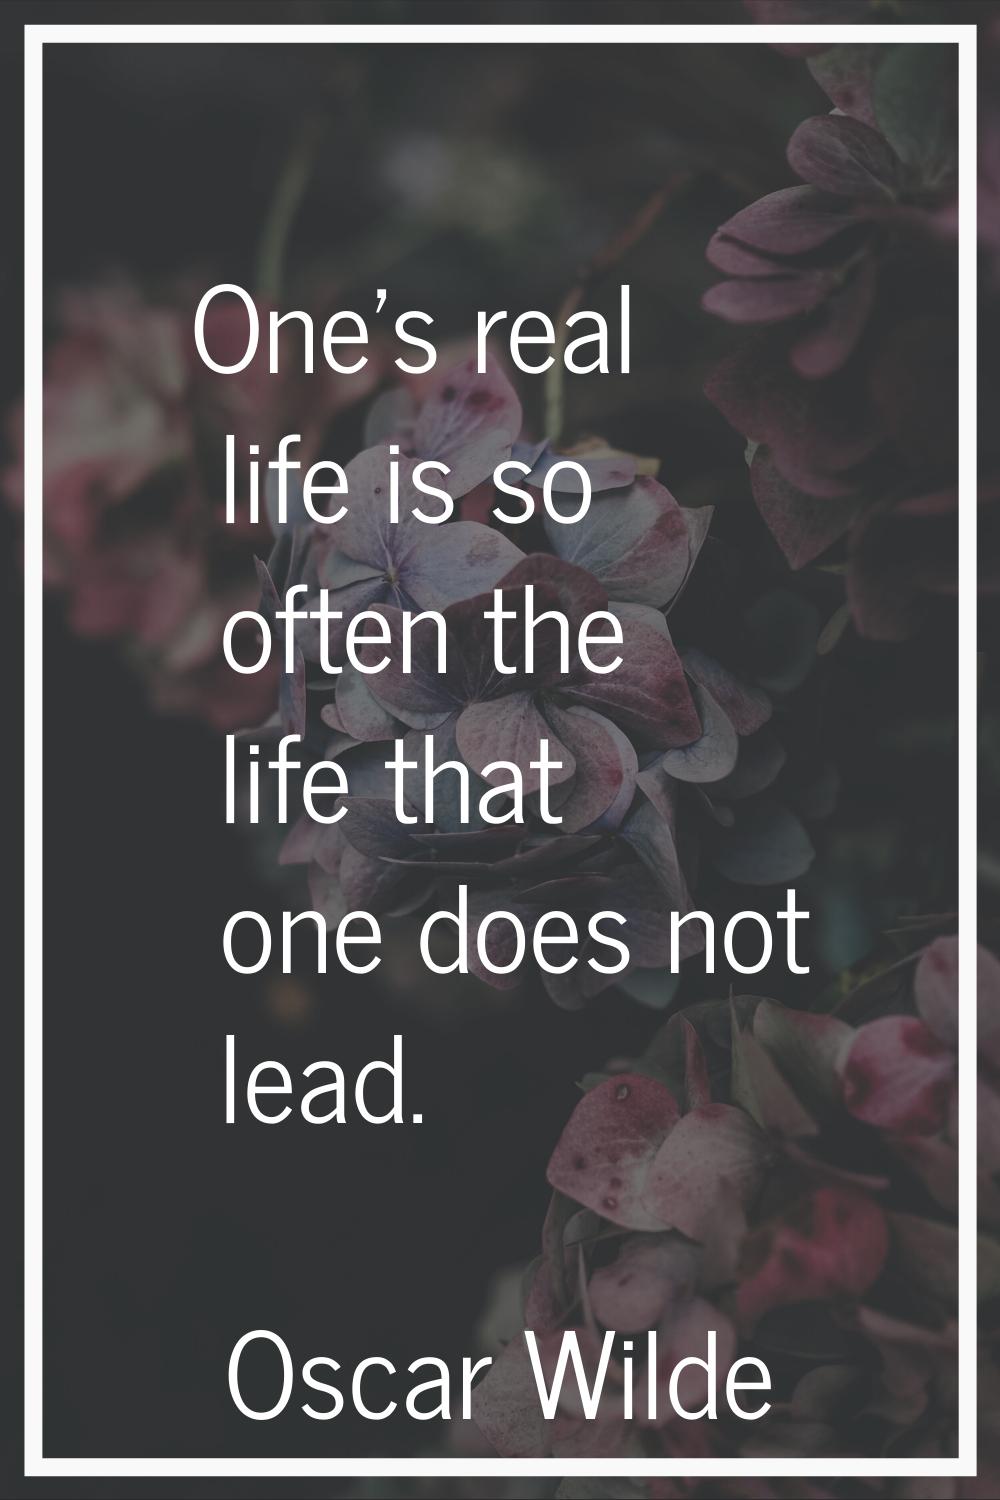 One's real life is so often the life that one does not lead.